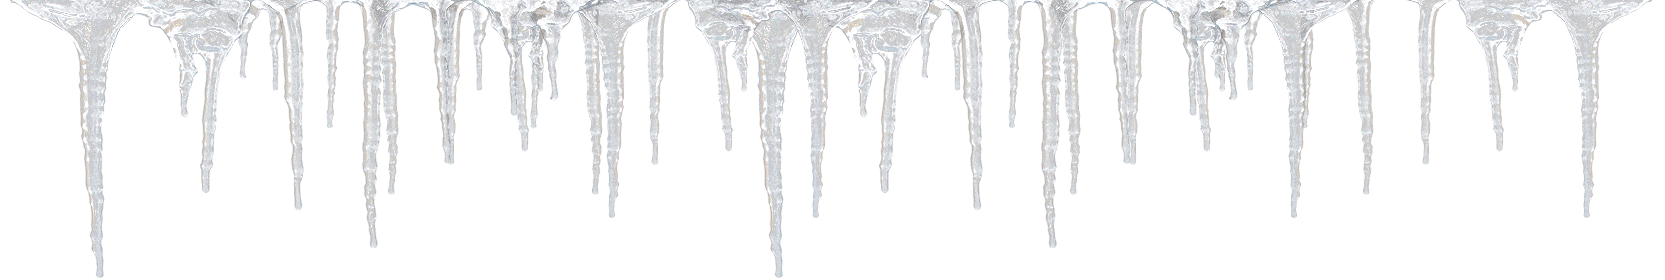 icicles clipart blue